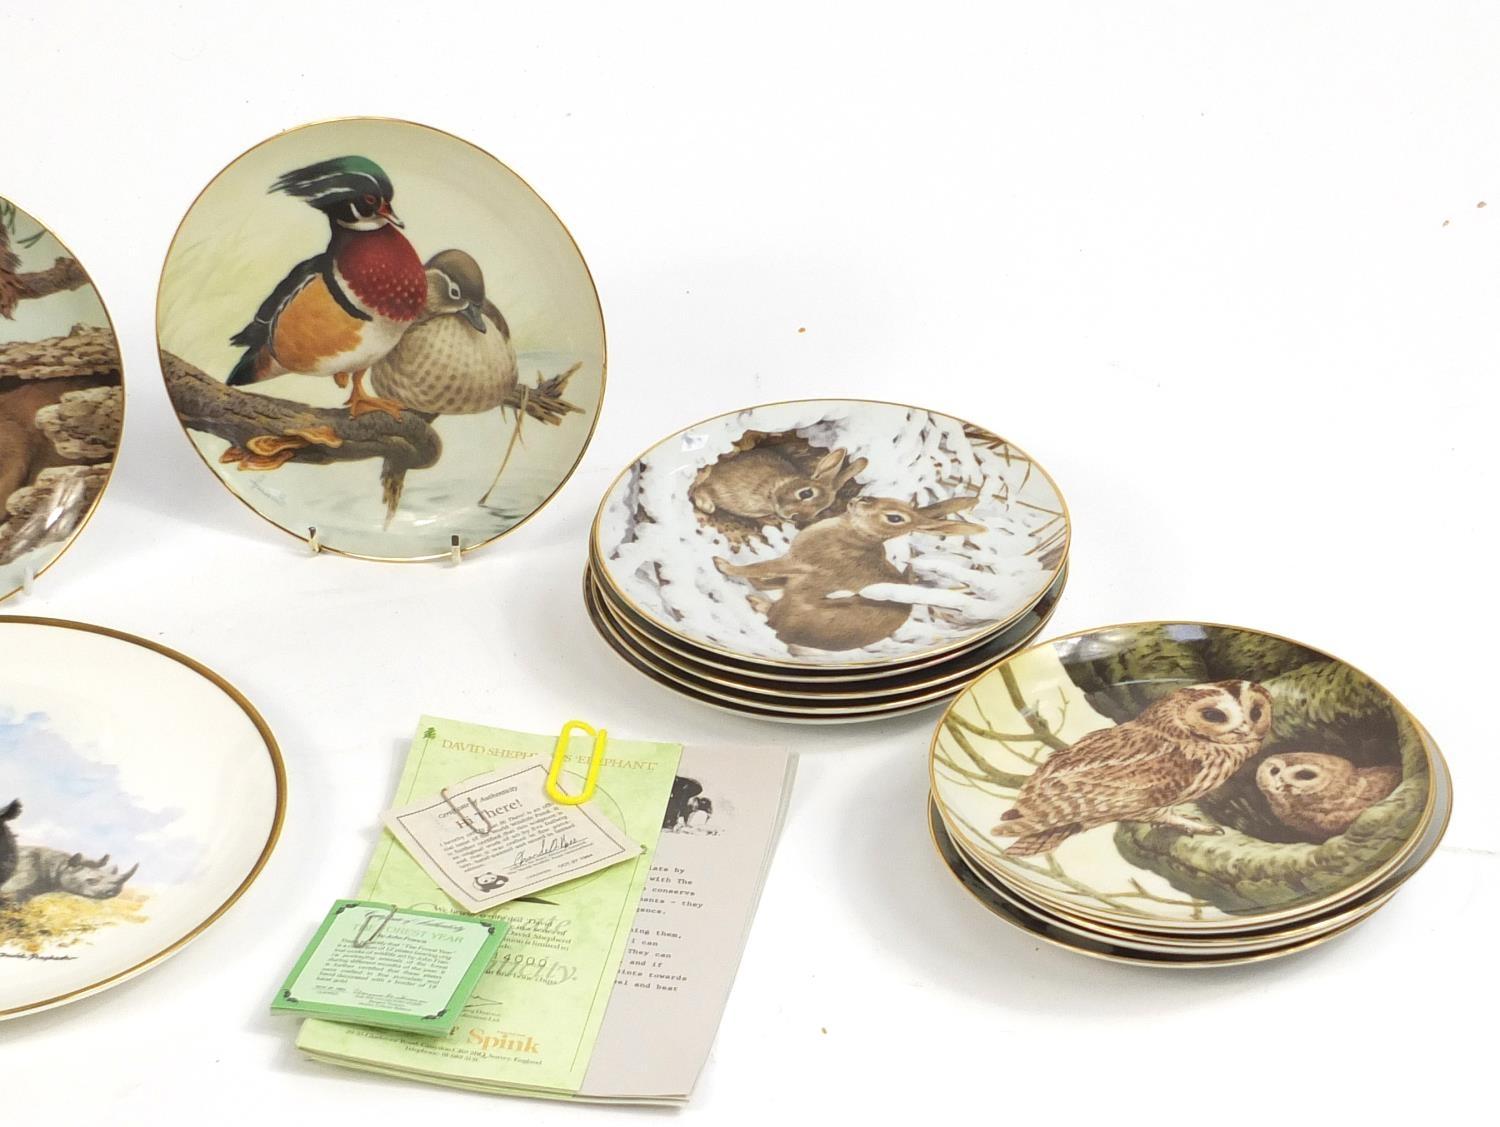 Wildlife collectors plates and animals including Wedgwood by Spink, David Shepherd collection : - Image 4 of 7